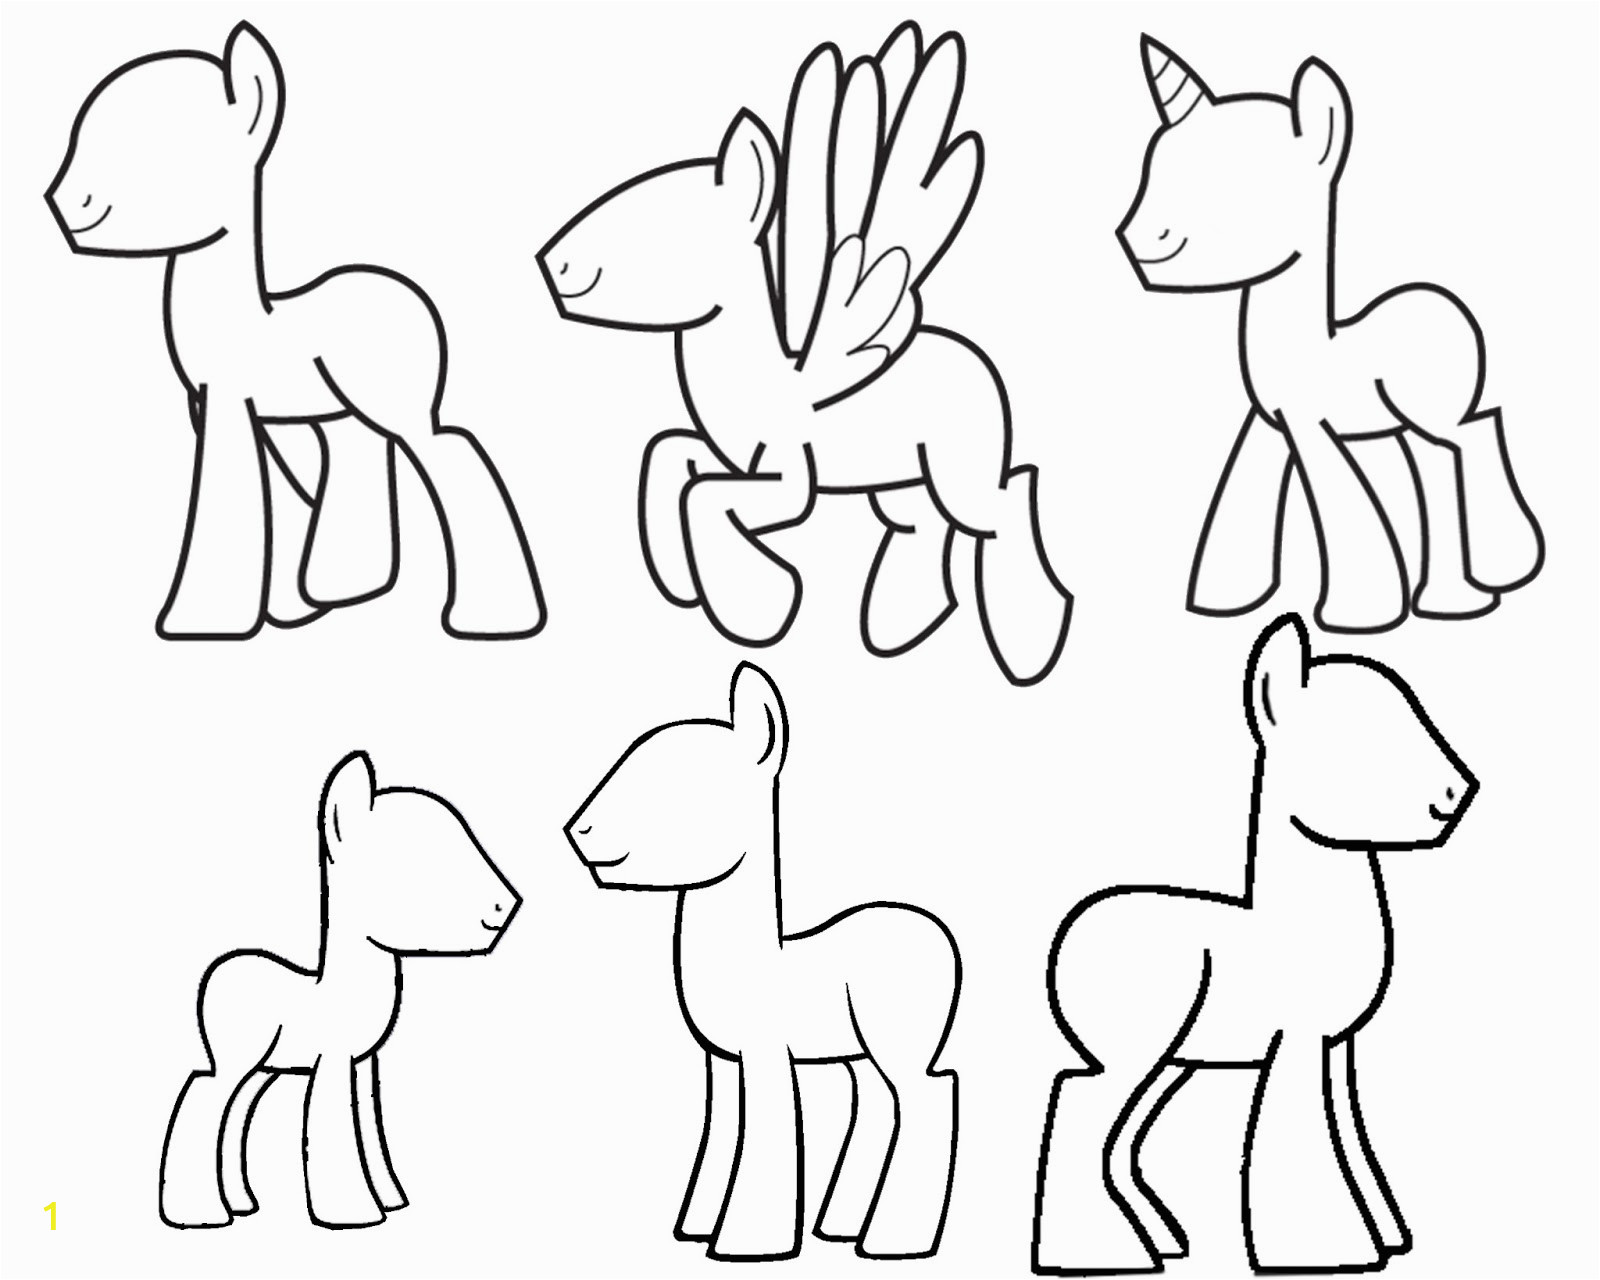 Make Your Own My Little Pony Coloring Pages Design and Draw Your Own My Little Pony